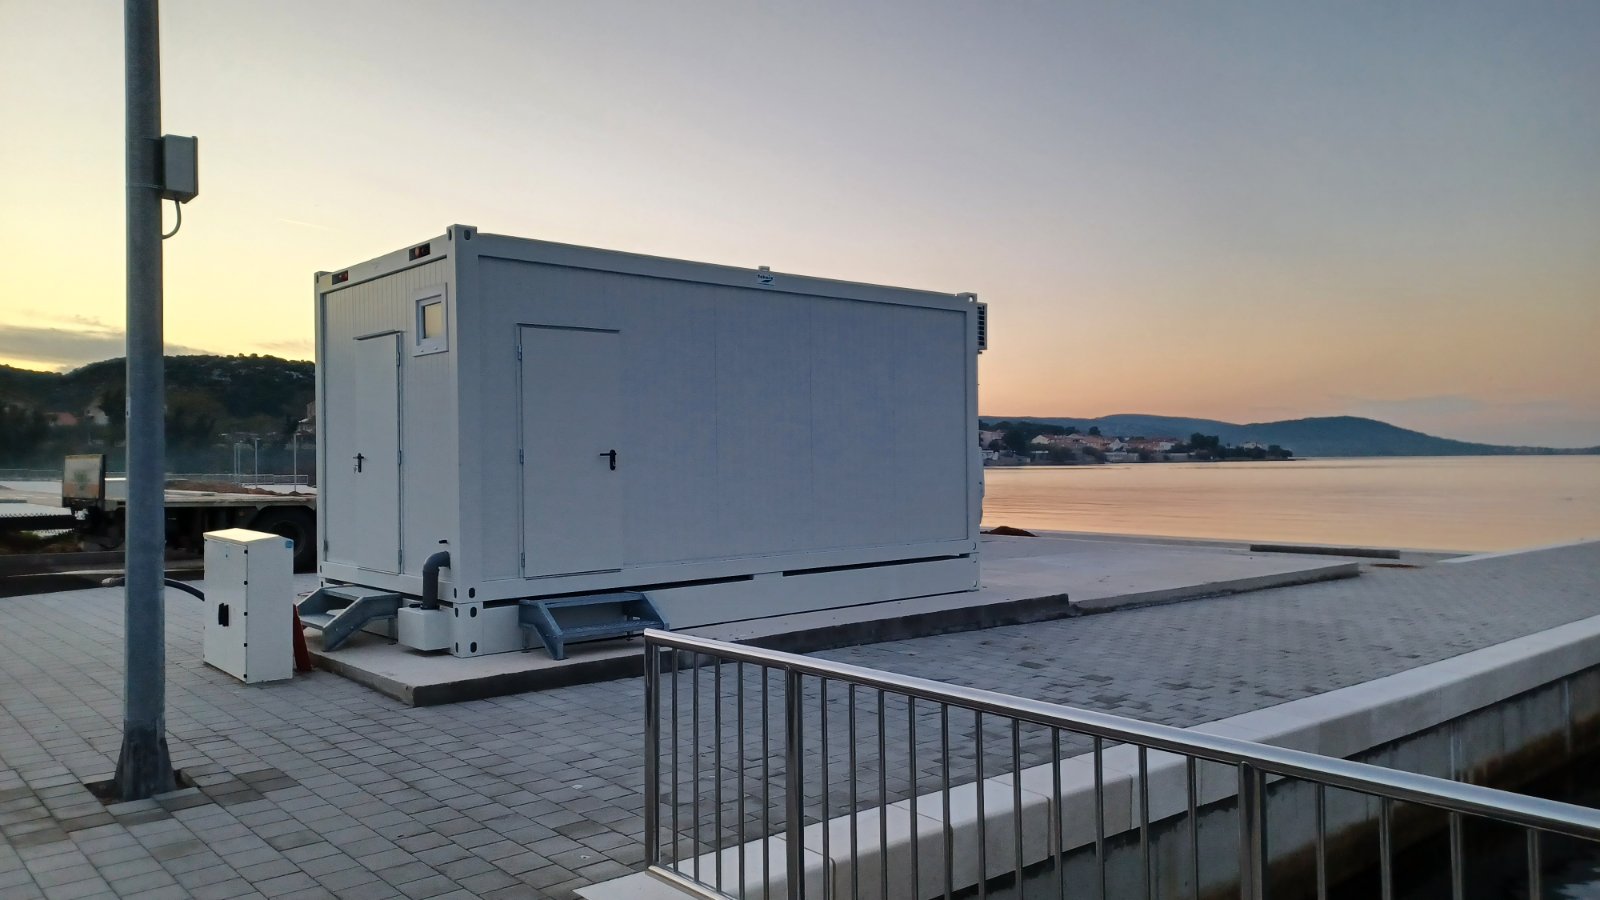 Successfully delivered and installed a modular container facility for the needs of the Zadar County Port Authority